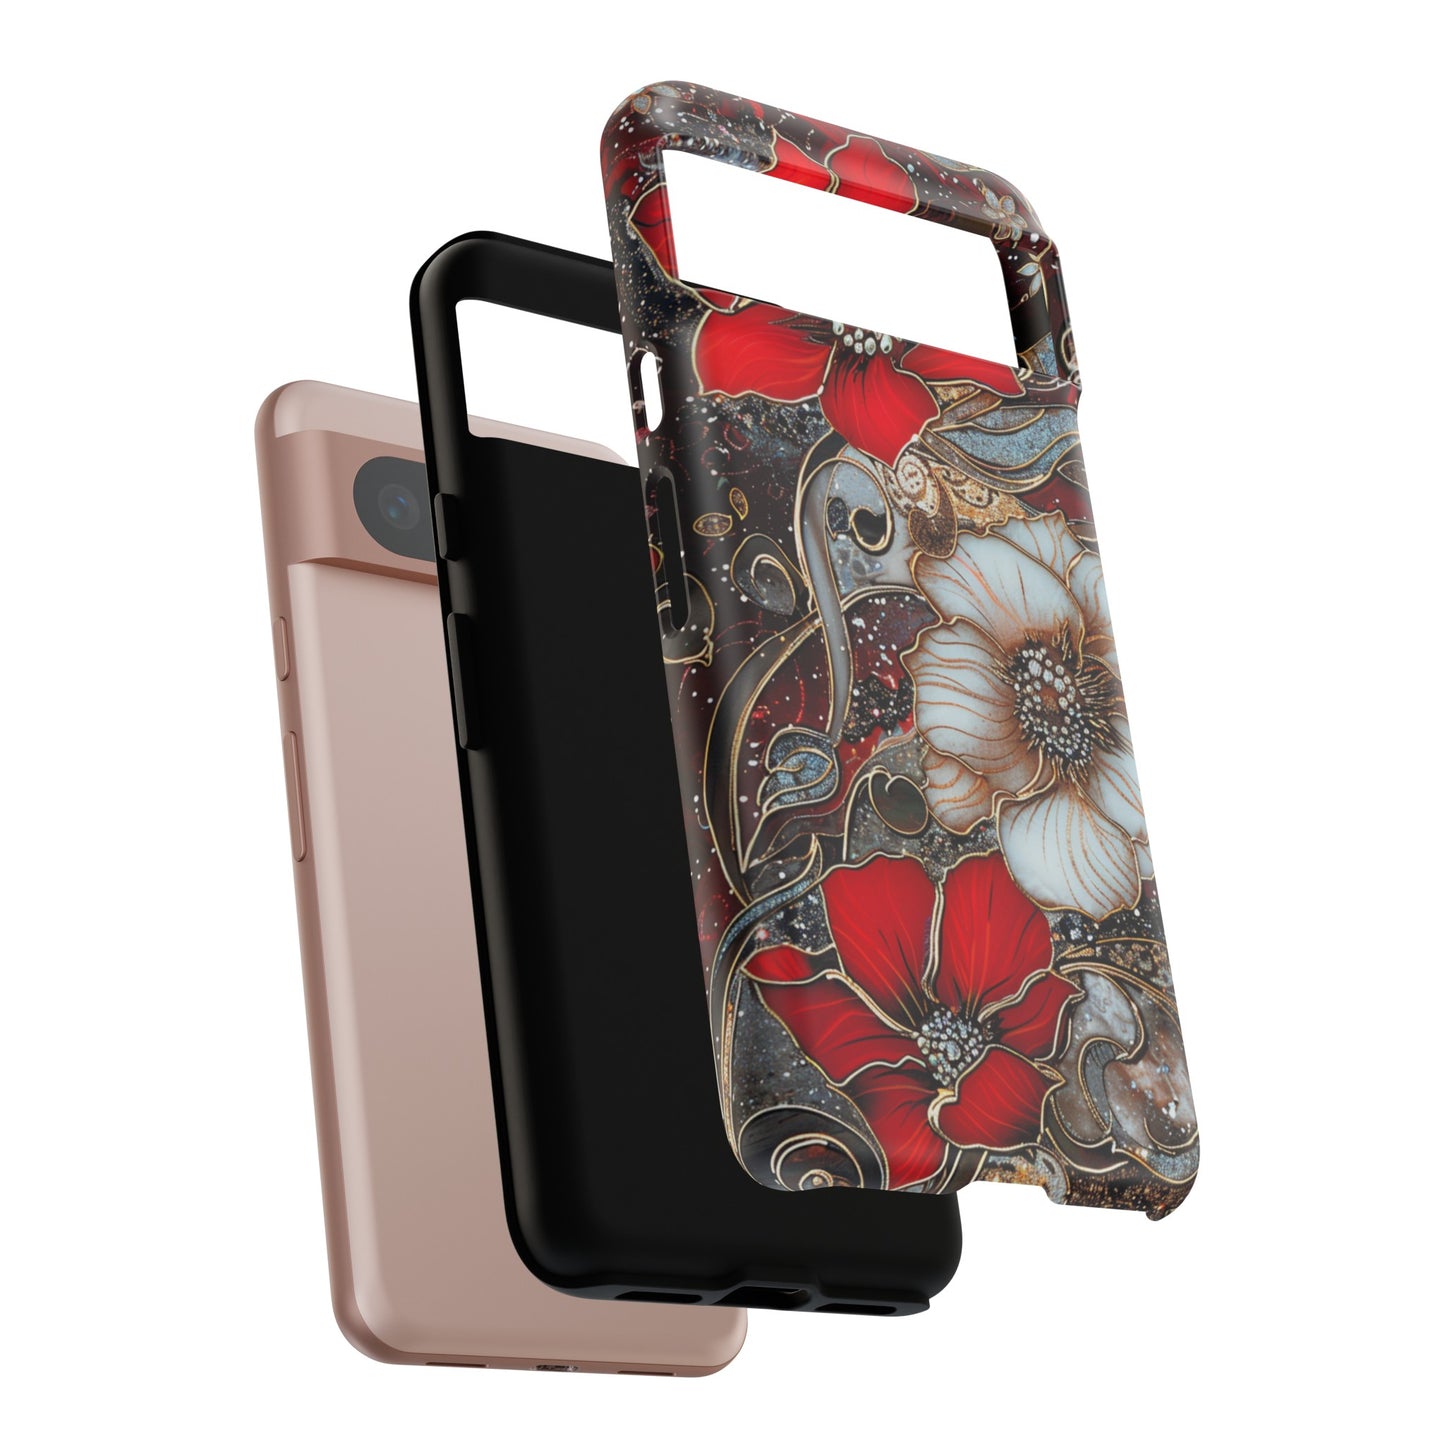 Stained Glass Floral Paisley Explosion Phone Case